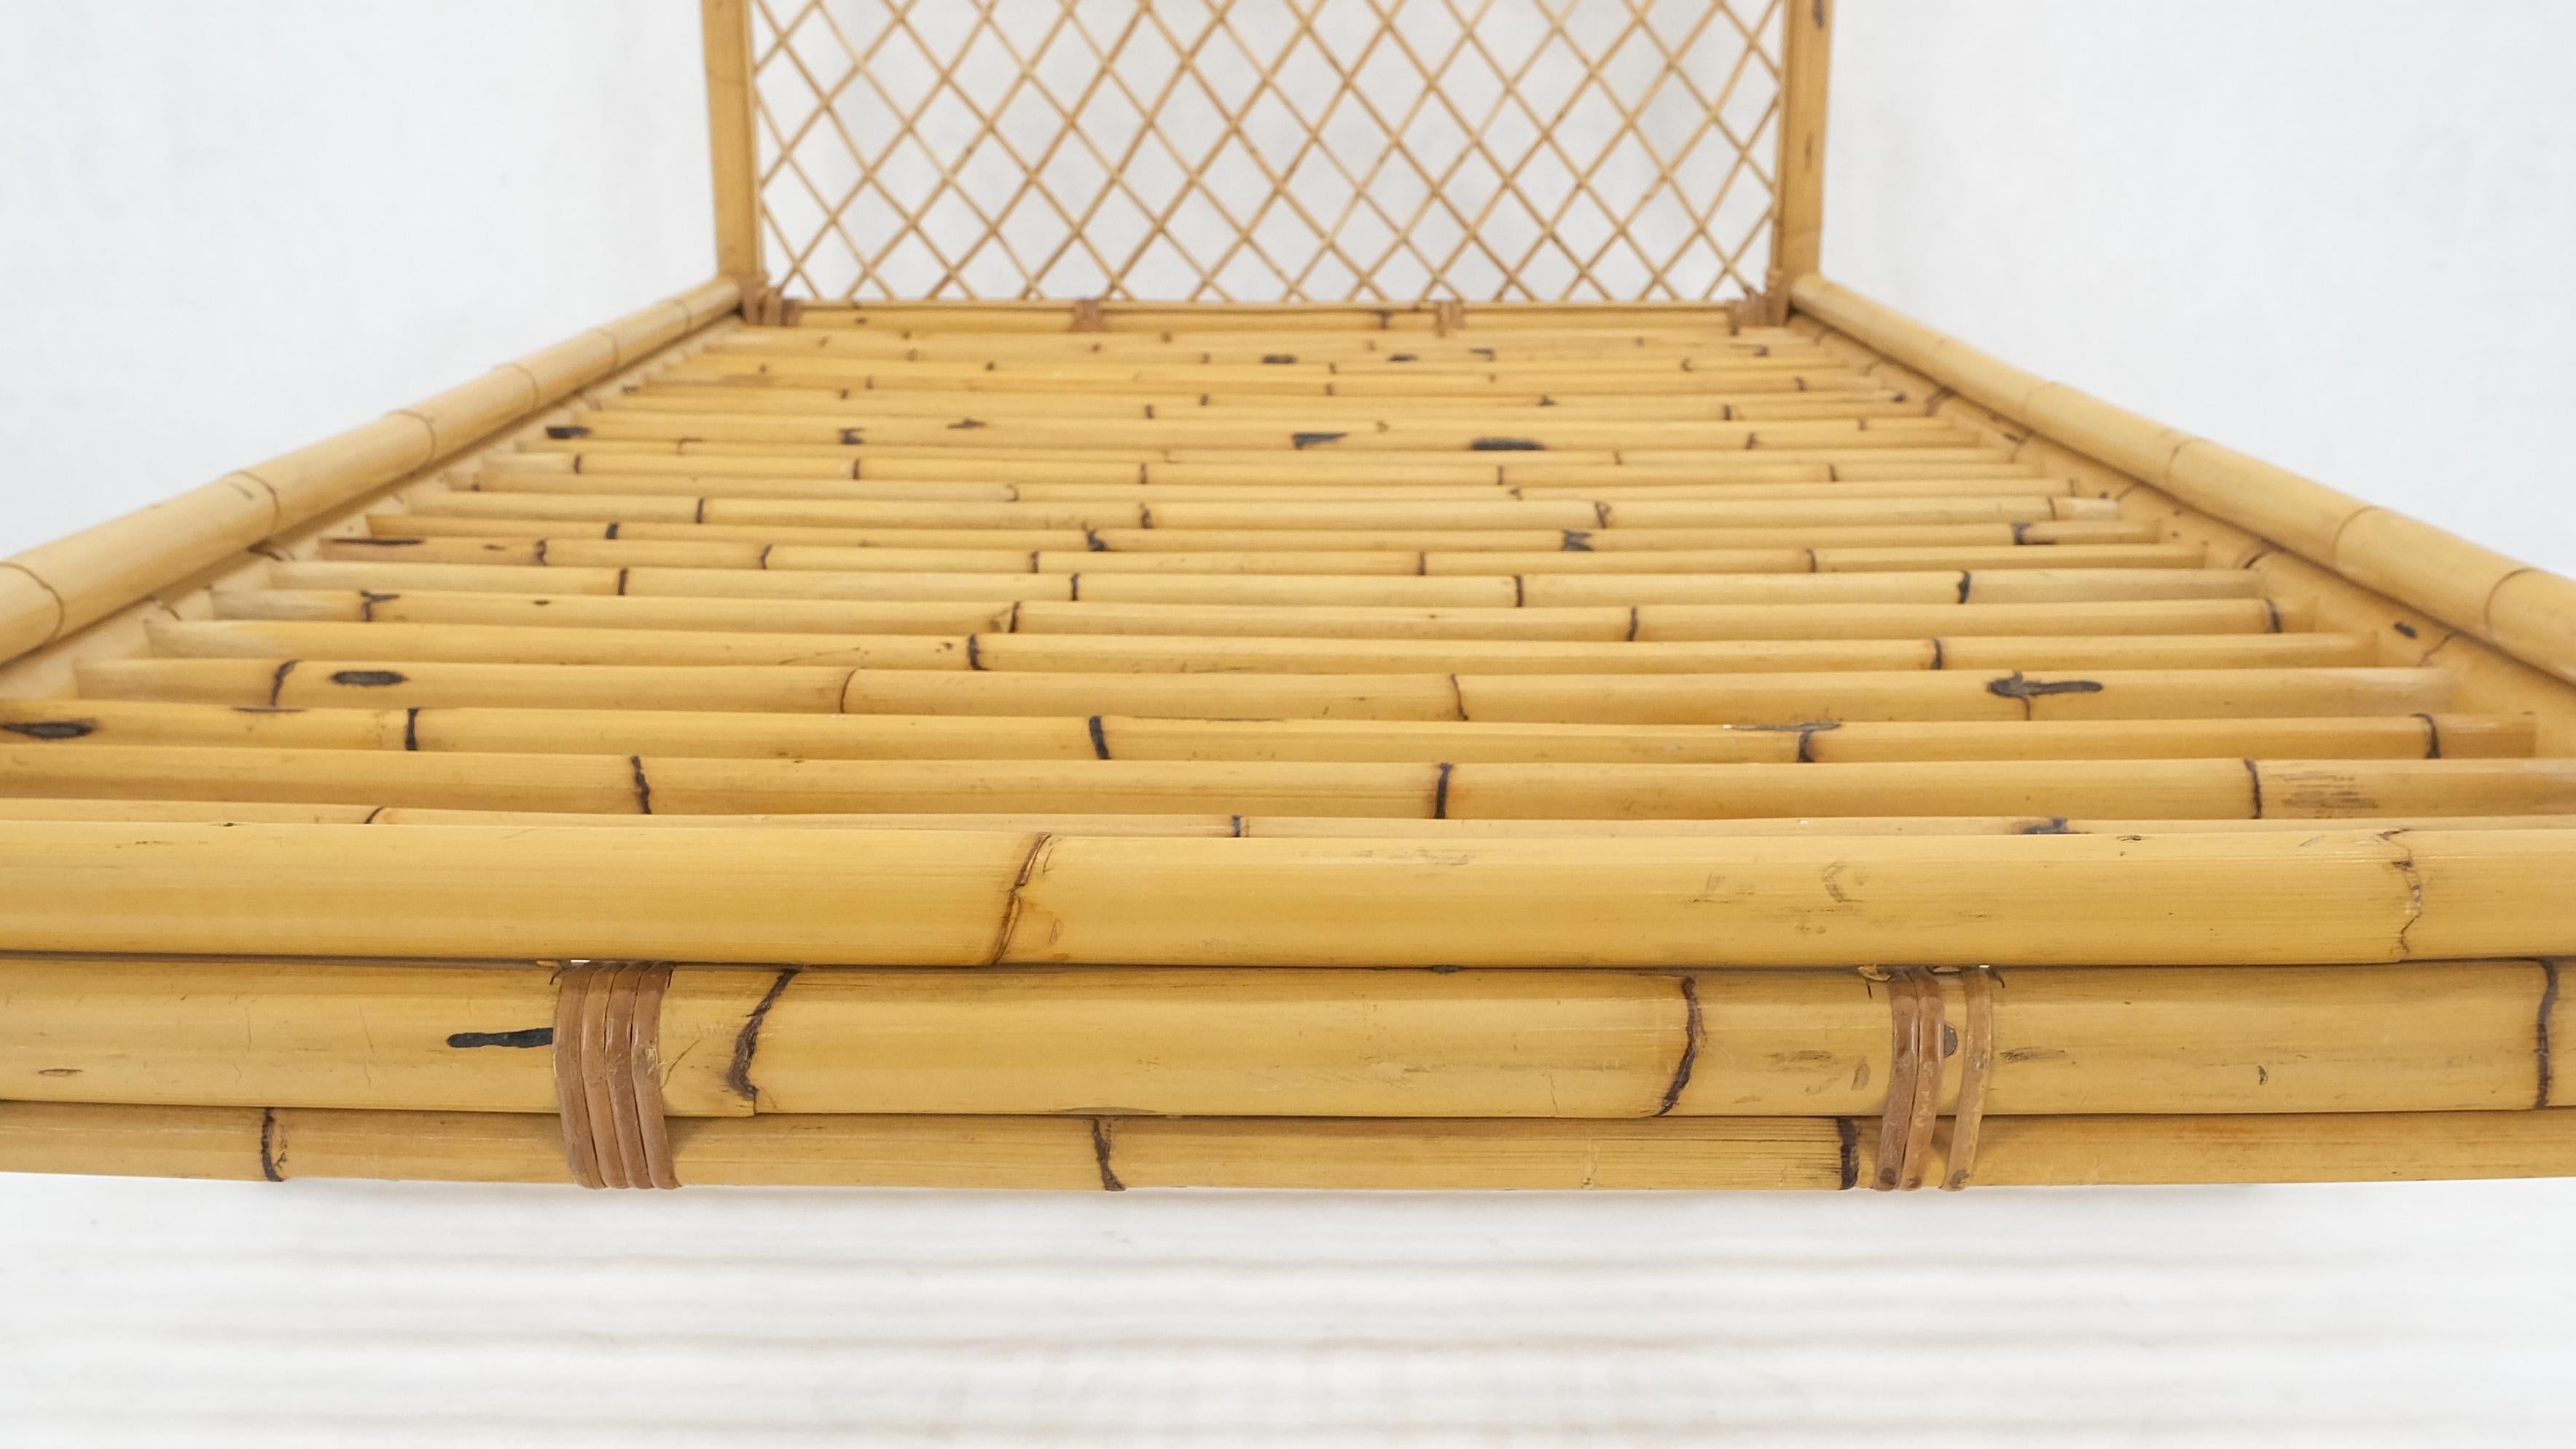 Vintage 1970s Large Bamboo Chaise Lounge Daybed Frame MINT! im Zustand „Gut“ im Angebot in Rockaway, NJ